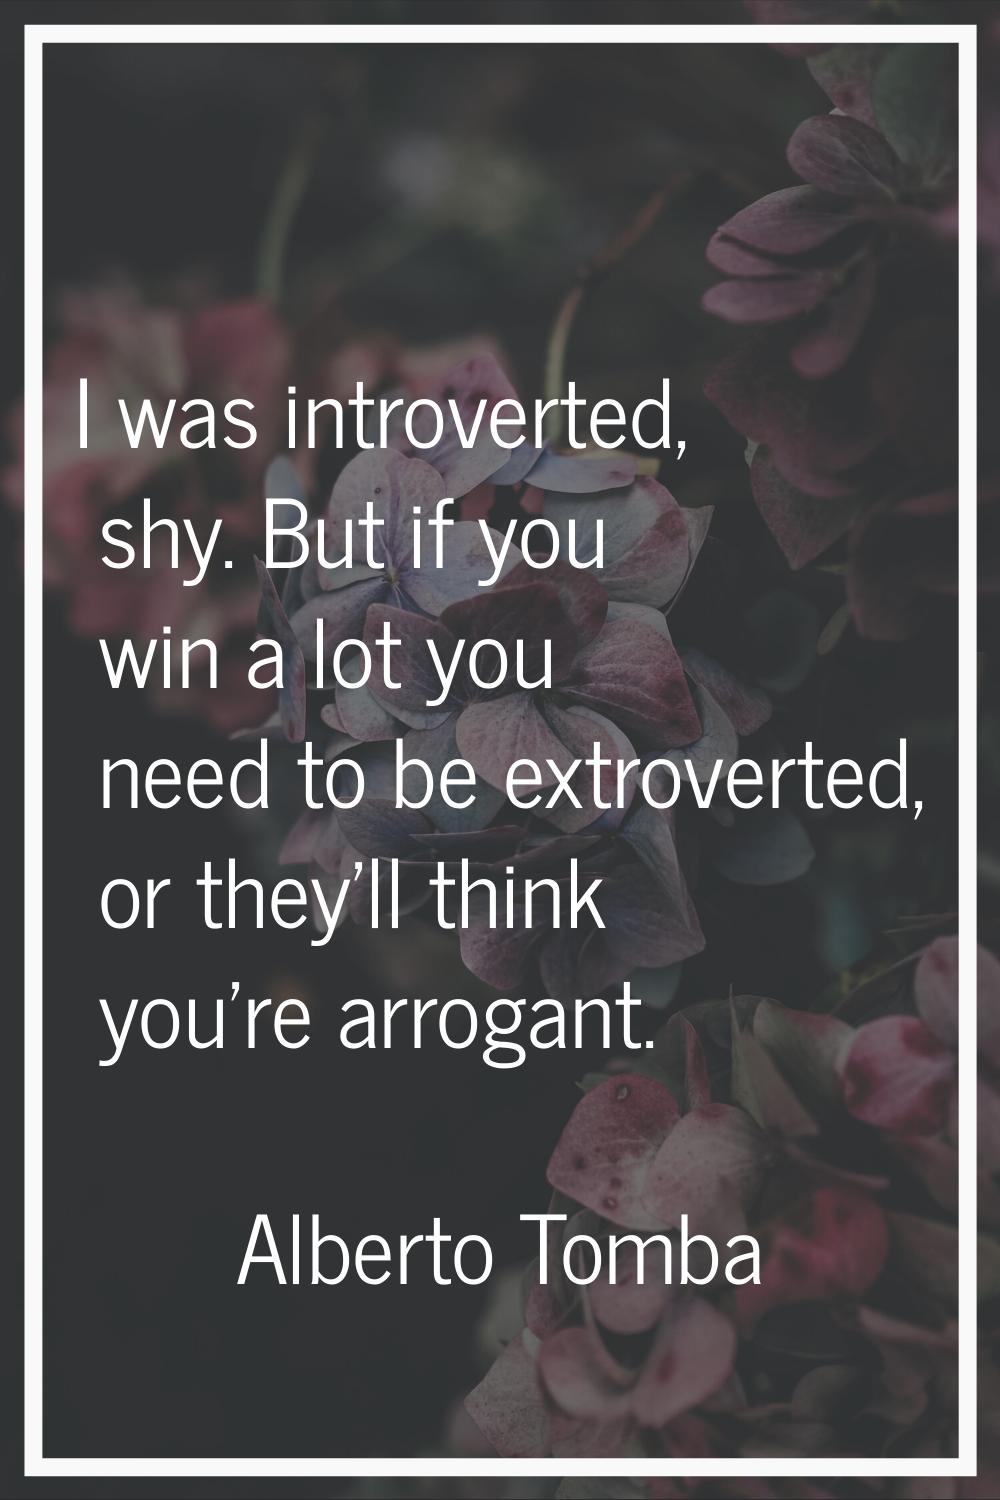 I was introverted, shy. But if you win a lot you need to be extroverted, or they'll think you're ar